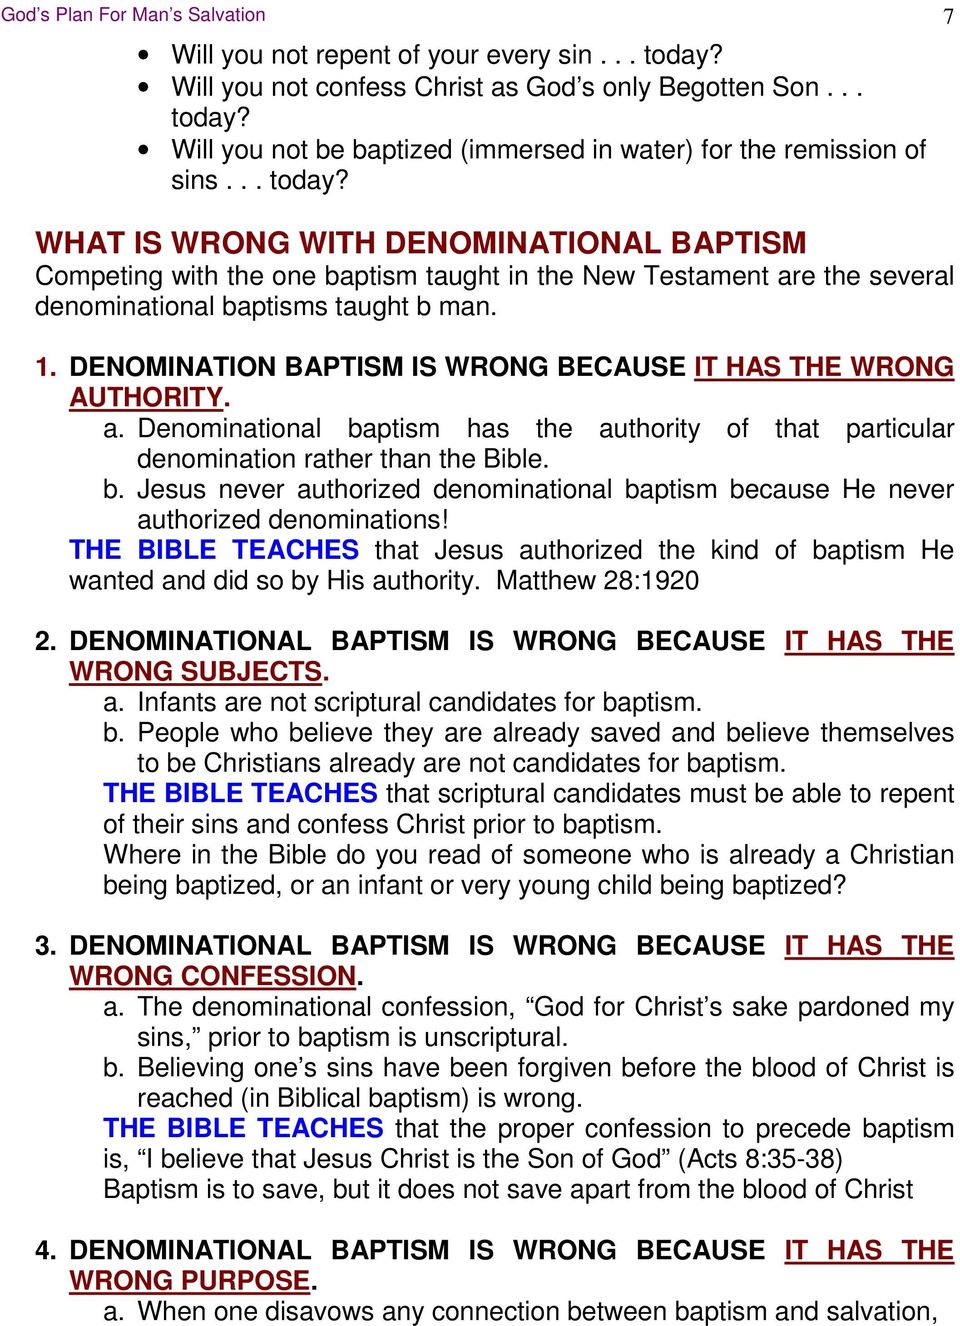 DENOMINATION BAPTISM IS WRONG BECAUSE IT HAS THE WRONG AUTHORITY. a. Denominational baptism has the authority of that particular denomination rather than the Bible. b. Jesus never authorized denominational baptism because He never authorized denominations!